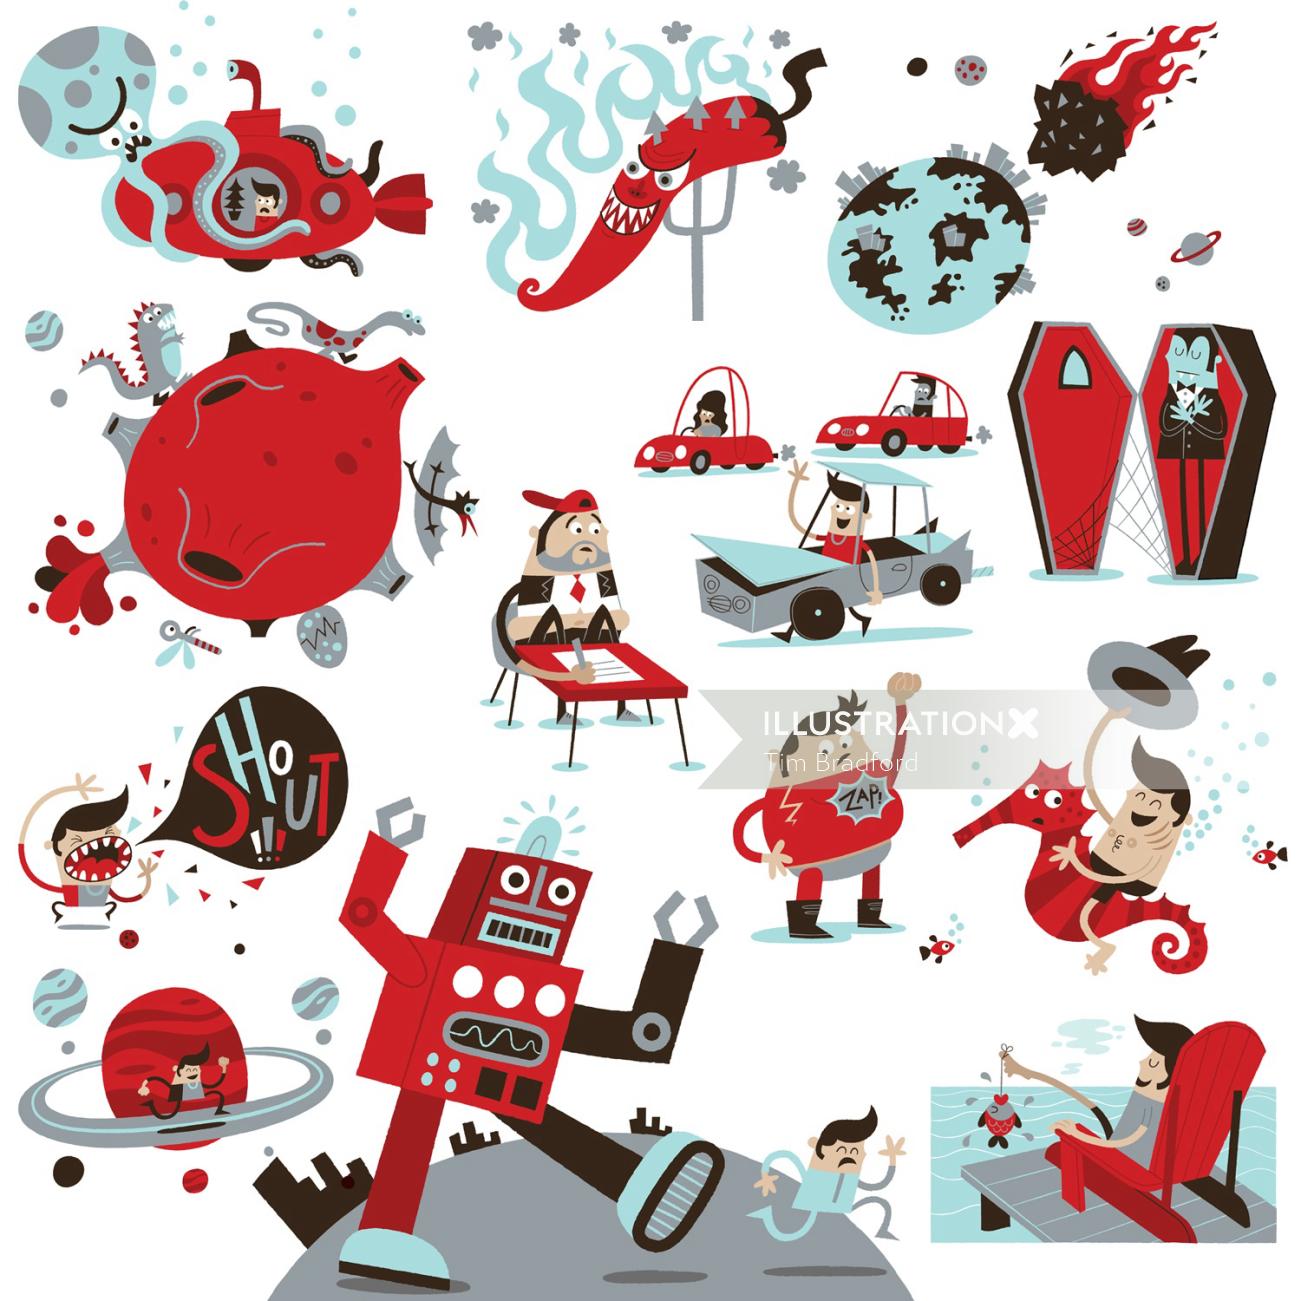 Storyboard illustration of red characters
